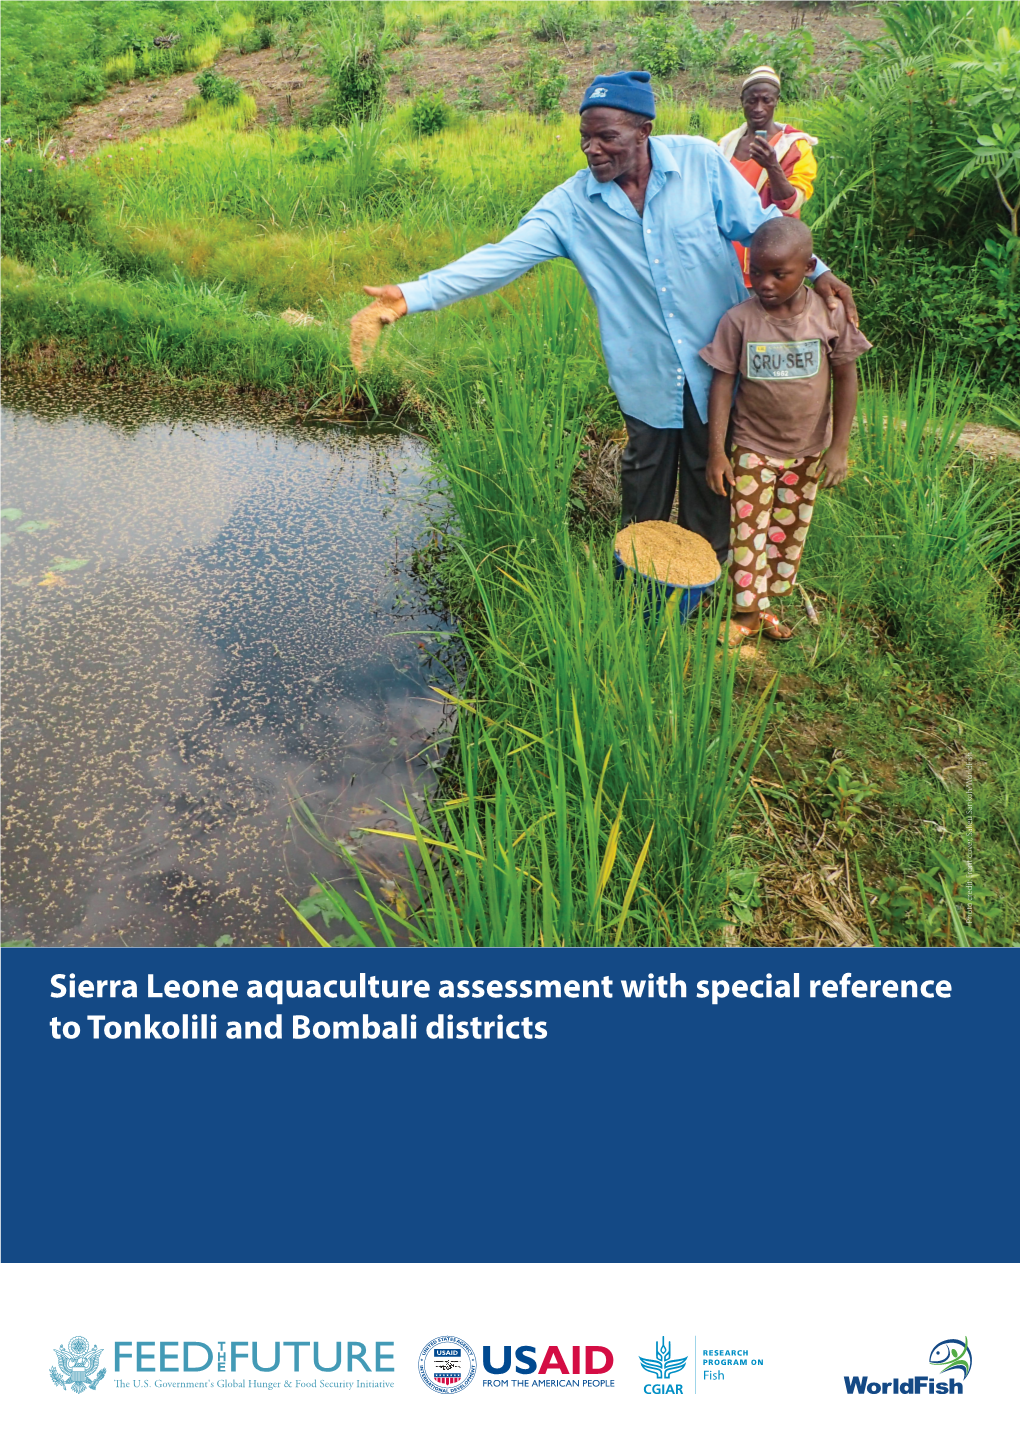 Sierra Leone Aquaculture Assessment with Special Reference to Tonkolili